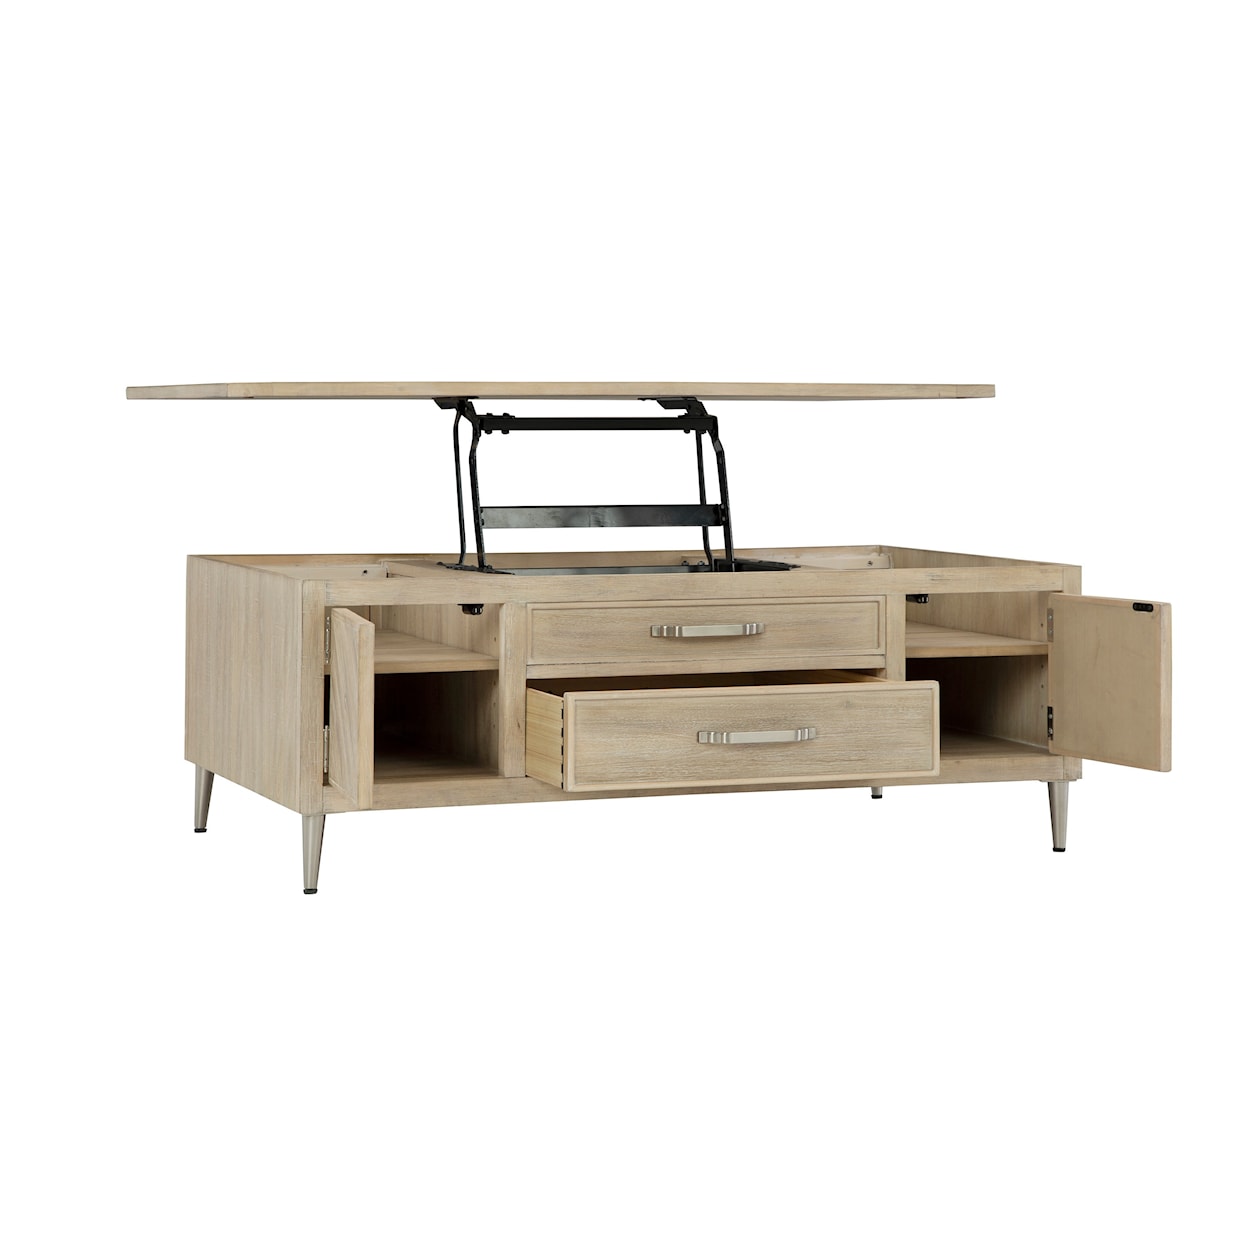 Aspenhome Maddox Lift Top Cocktail Table